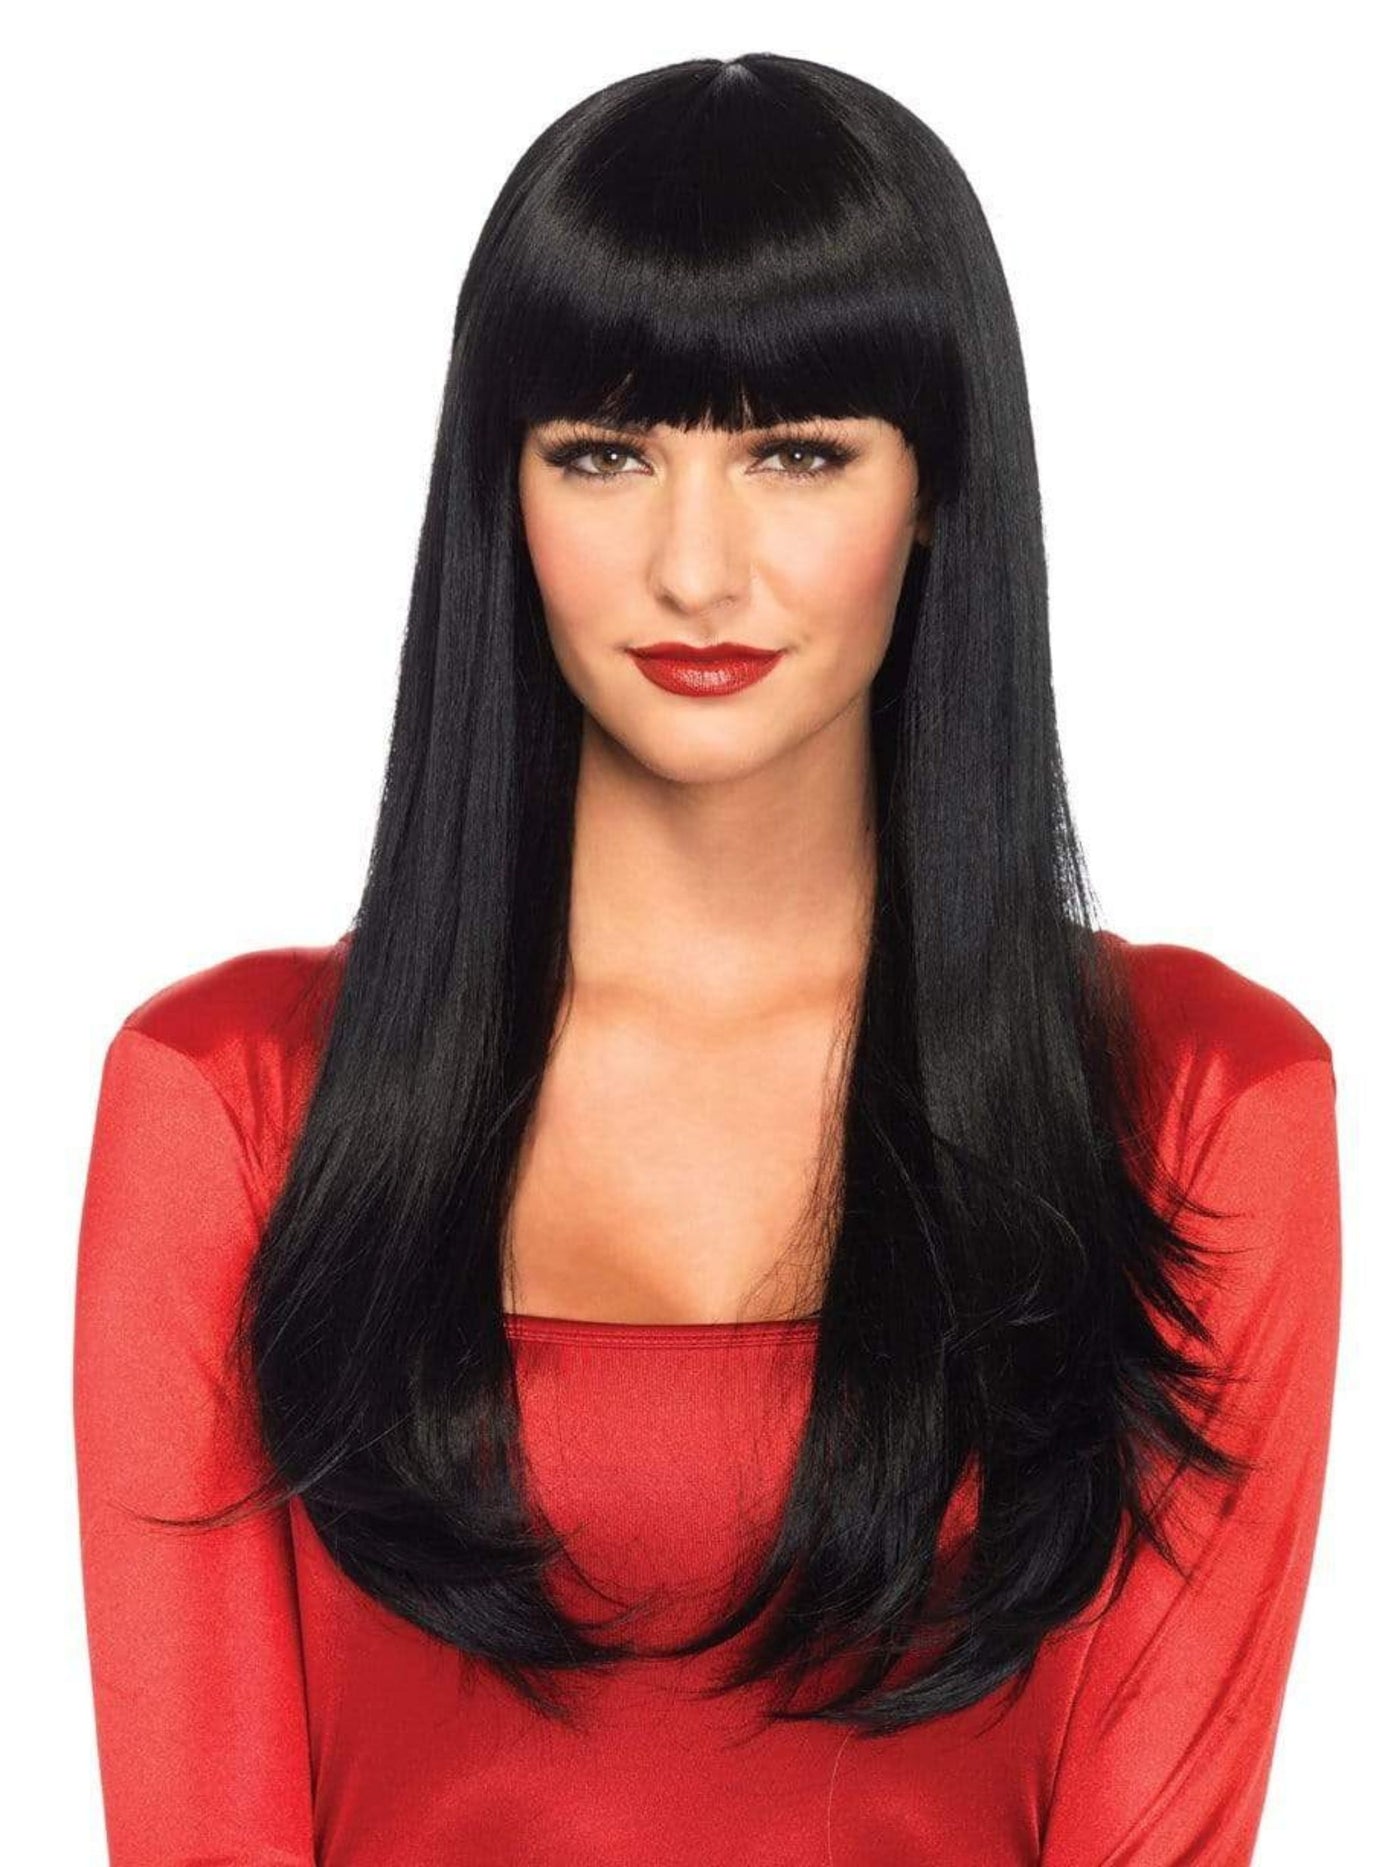 Black Long Straight Women's Costume Wig with Front Fringe - Shop Fortune Costumes Lingerie